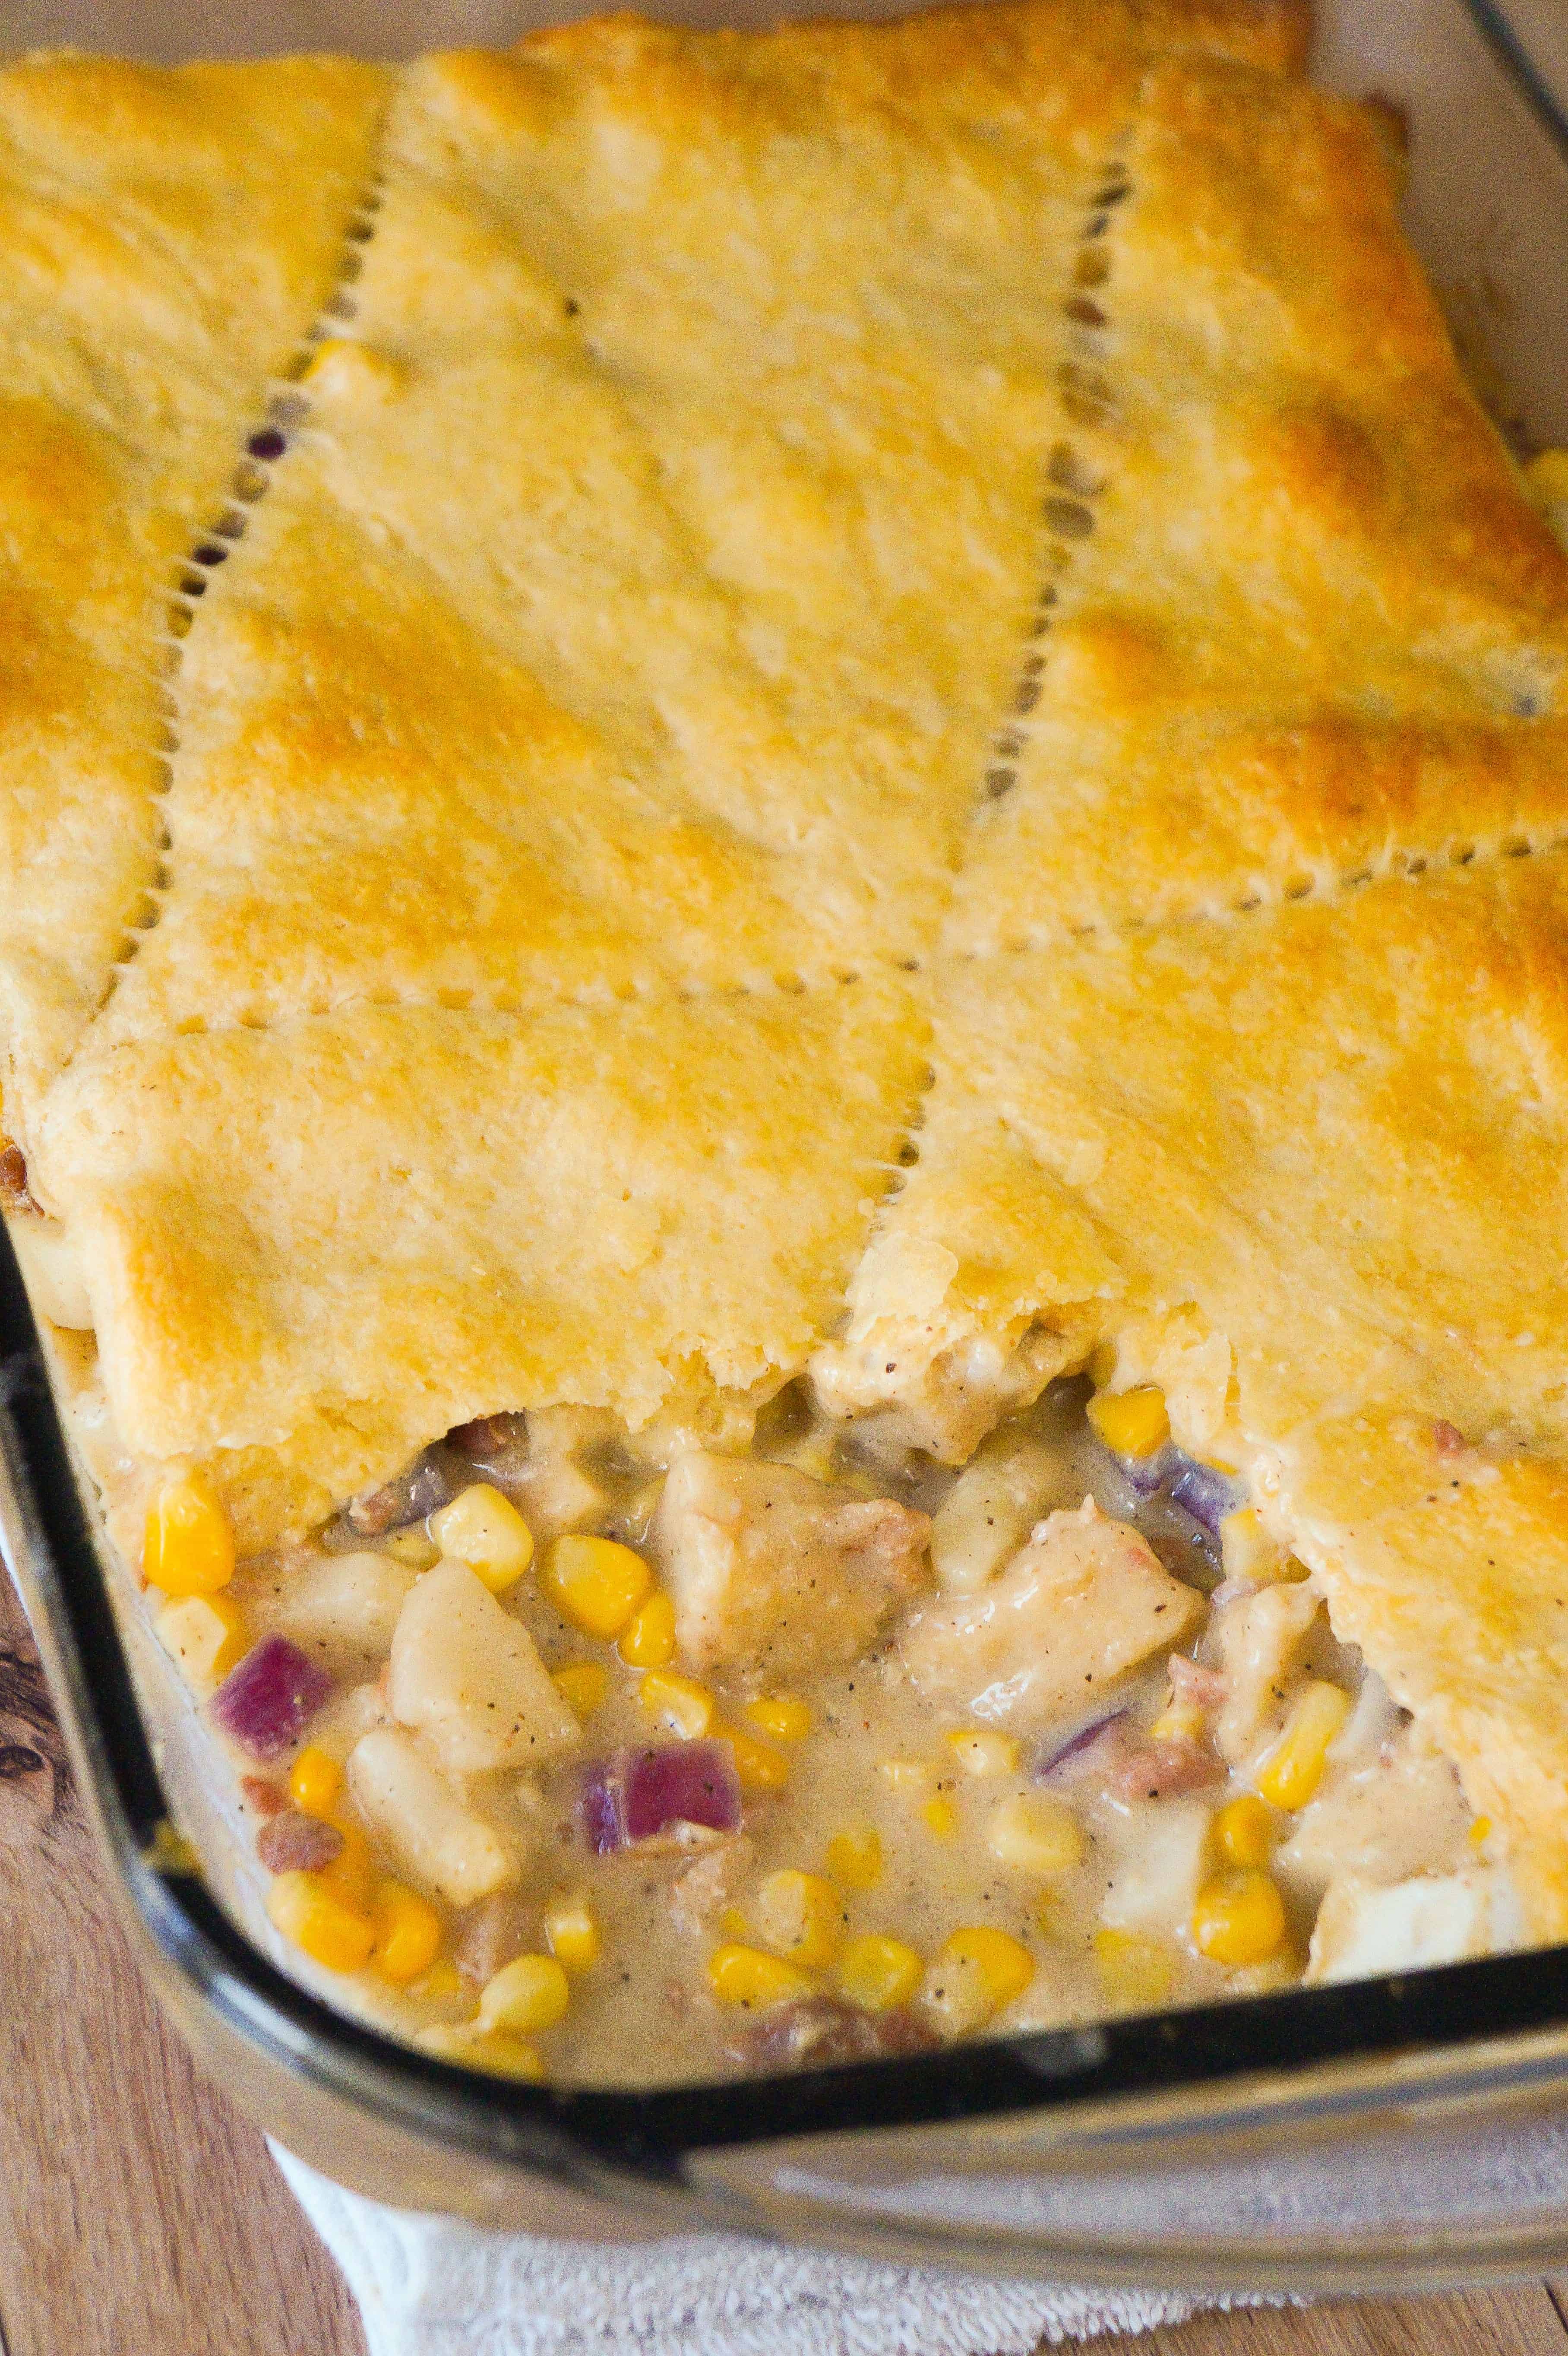 Bacon Chicken Pot Pie Casserole topped with Crescent Rolls is the perfect winter comfort food dish.